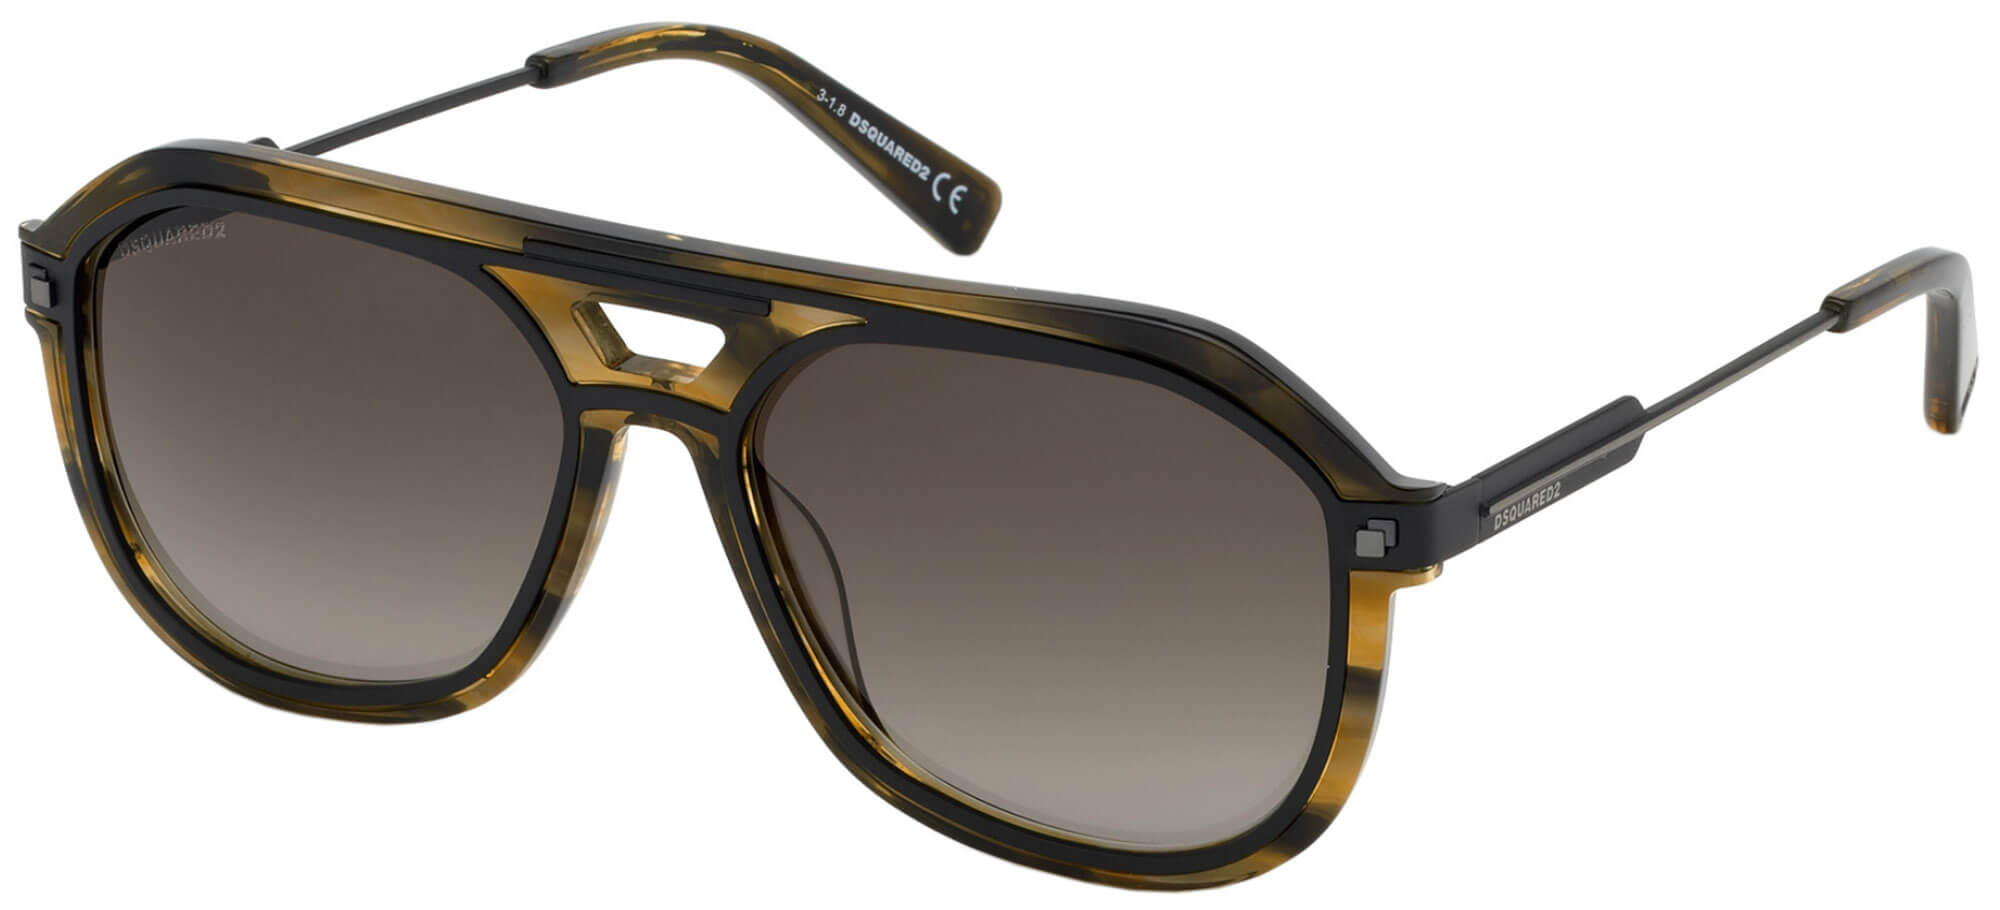 Dsquared2BRYCE DQ 0307Green Havana/grey Shaded (95P A)